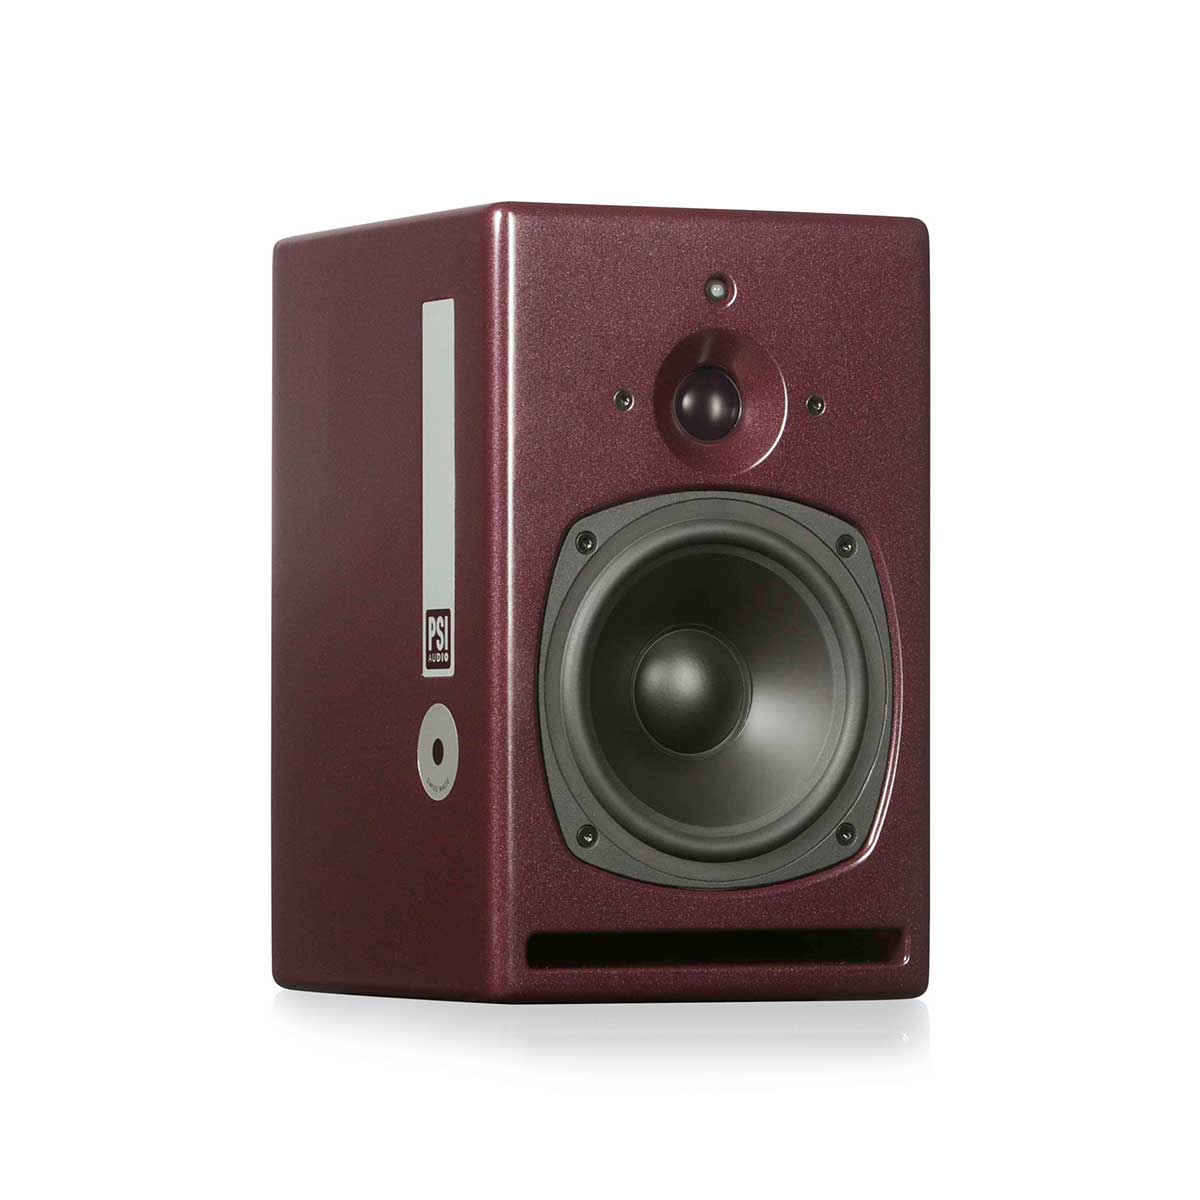 PSI Audio A17-M Active 6" Reference Studio Monitor